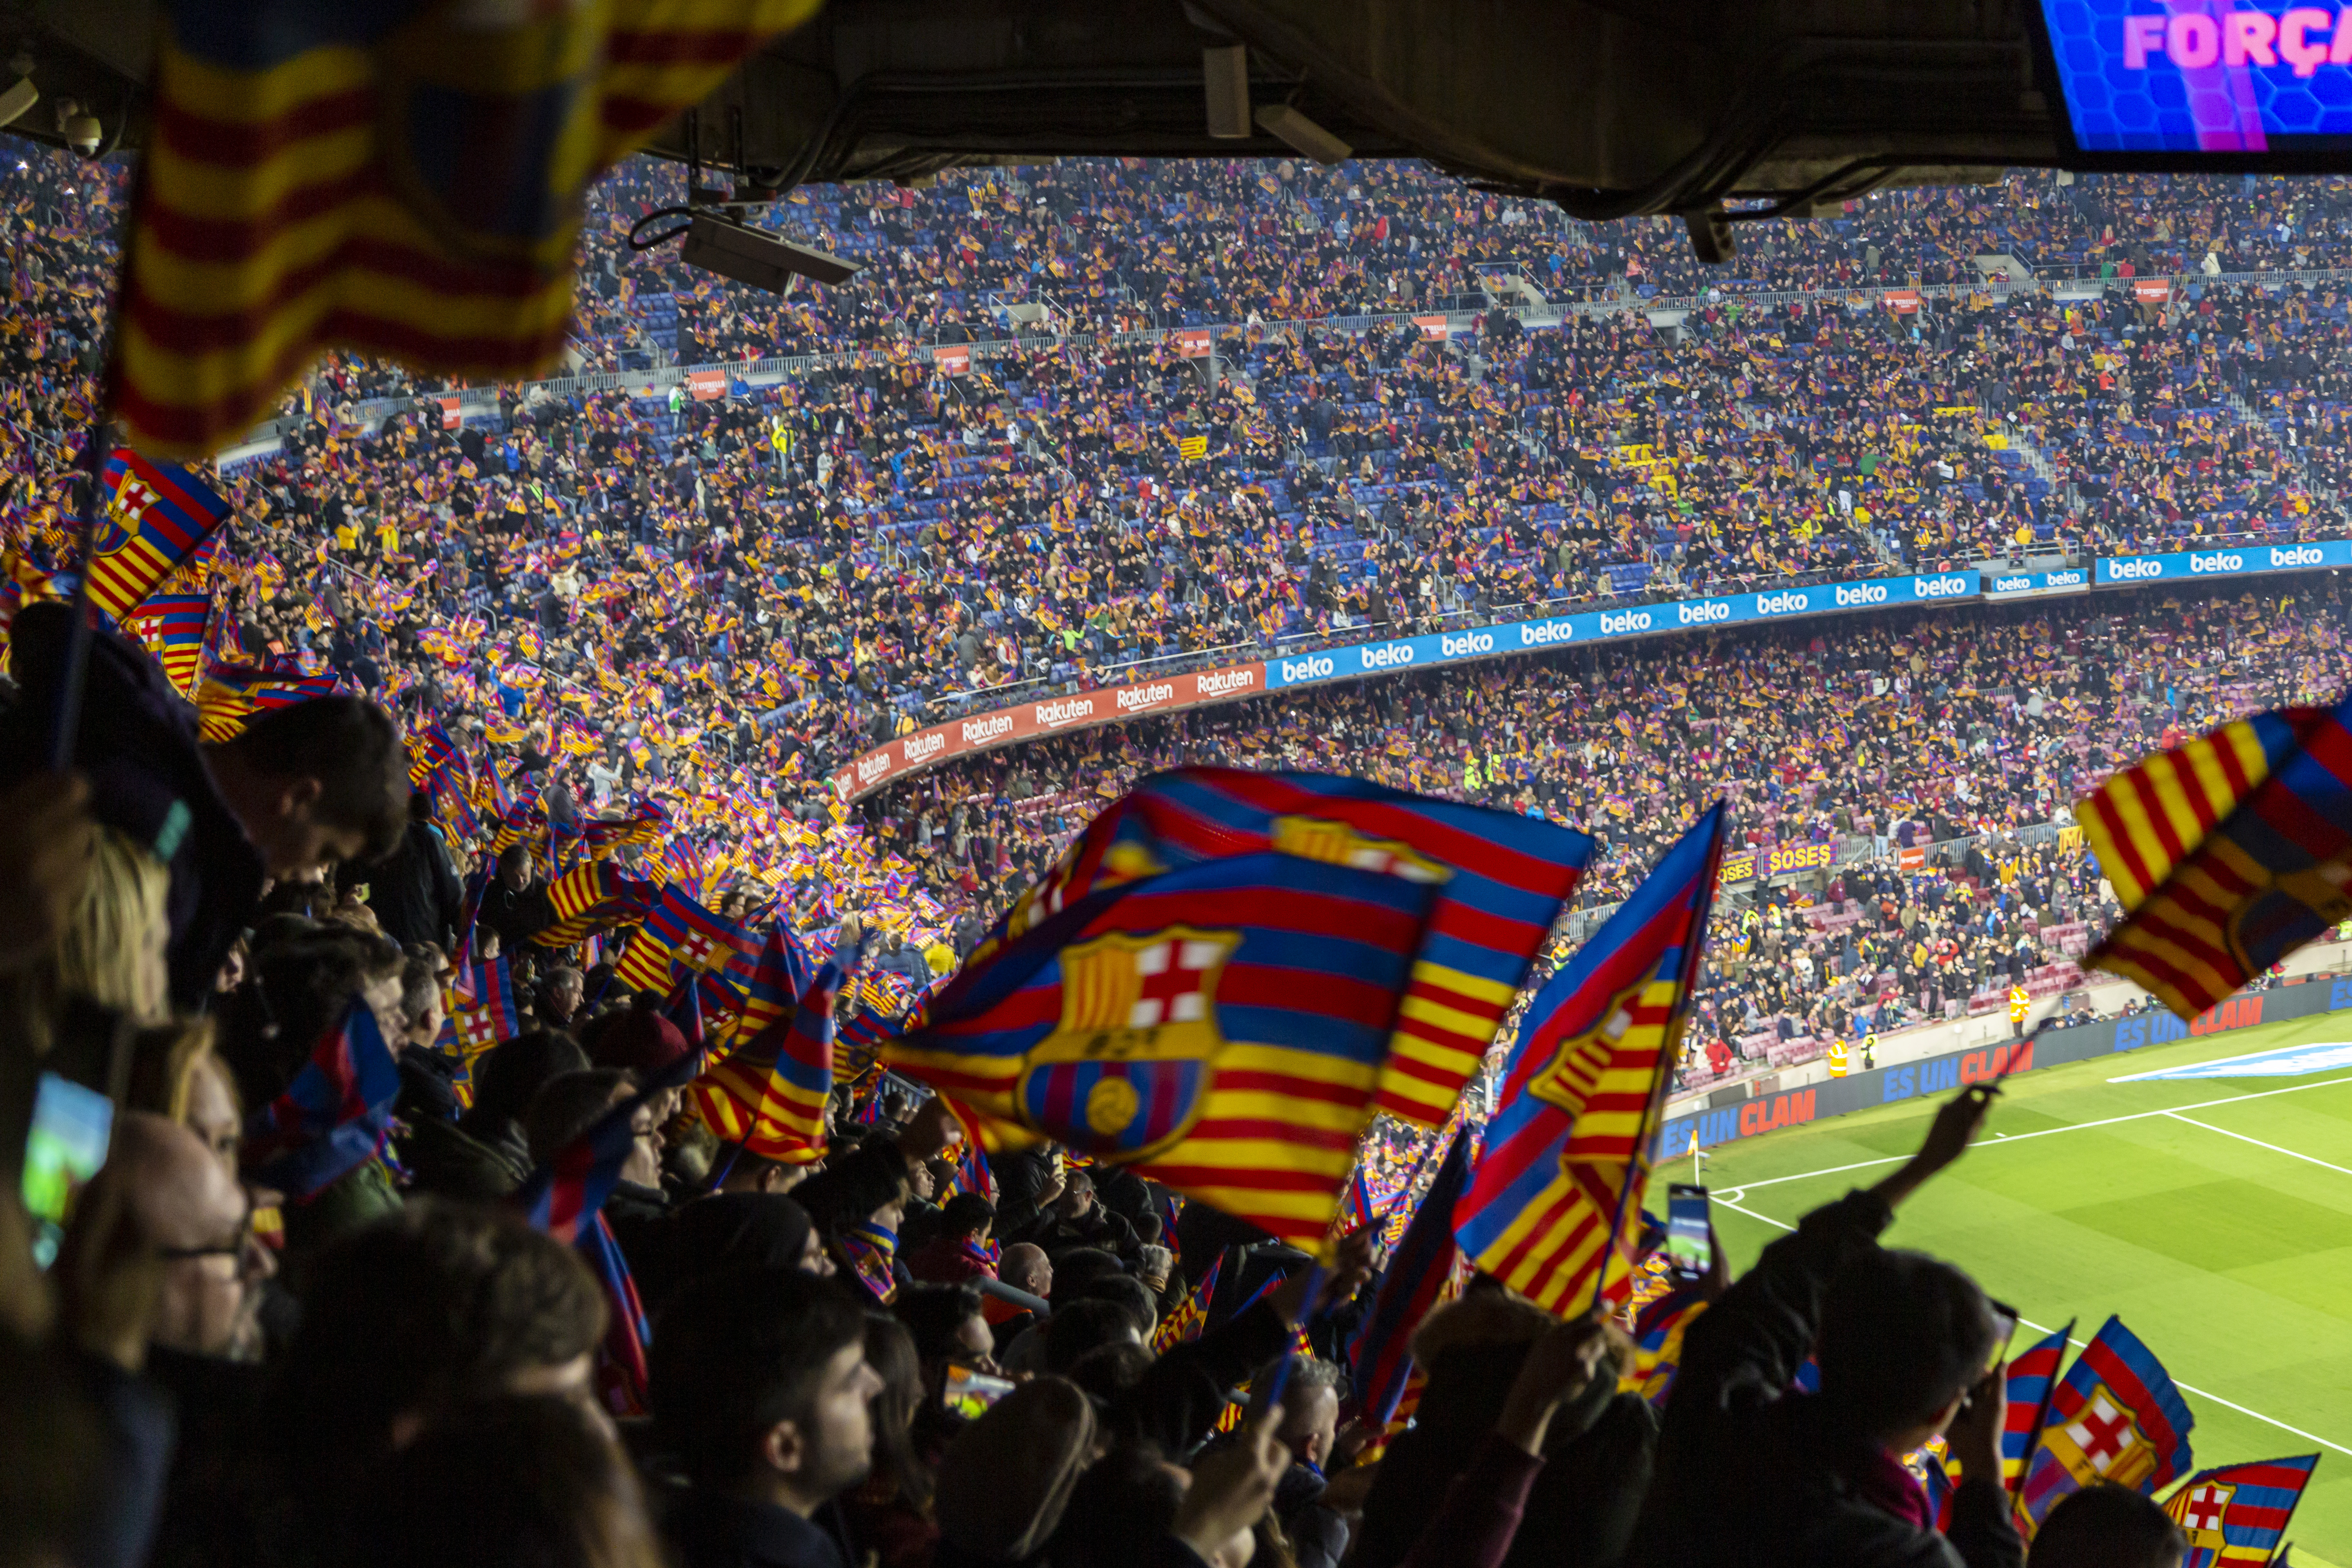 Camp Nou tickets on Football Host: The complete football experience in Barcelona